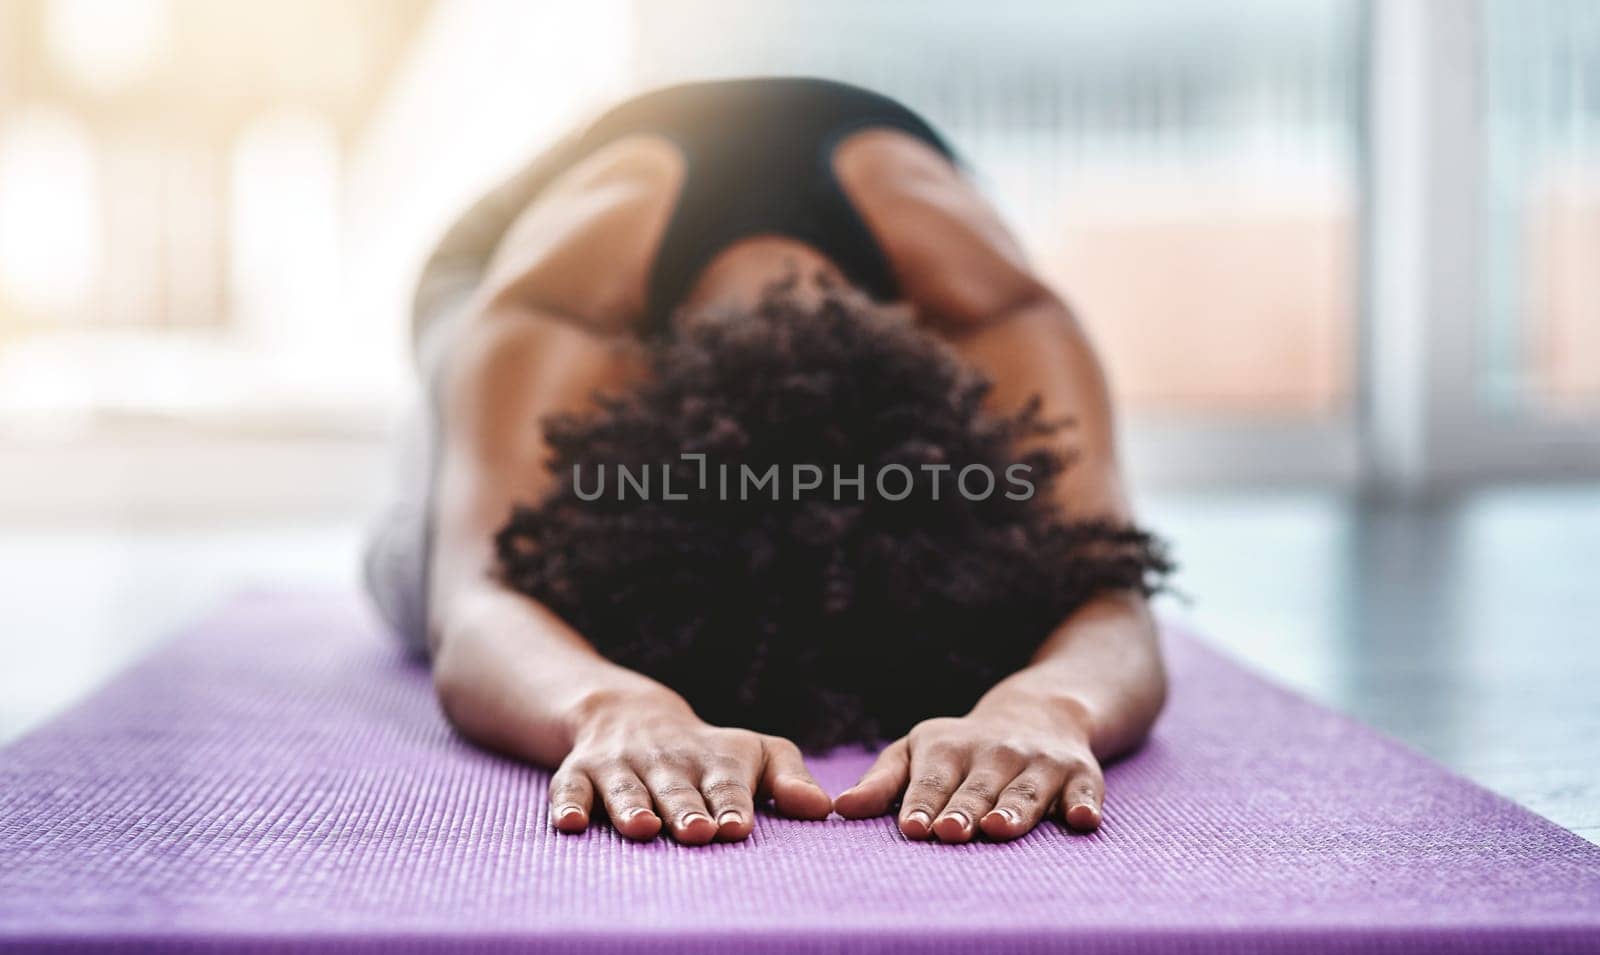 Yoga, fitness and wellness with a woman in studio on an exercise mat for inner peace or to relax. Health, exercise and zen with a female athlete or yogi in the childs pose for balance or awareness.